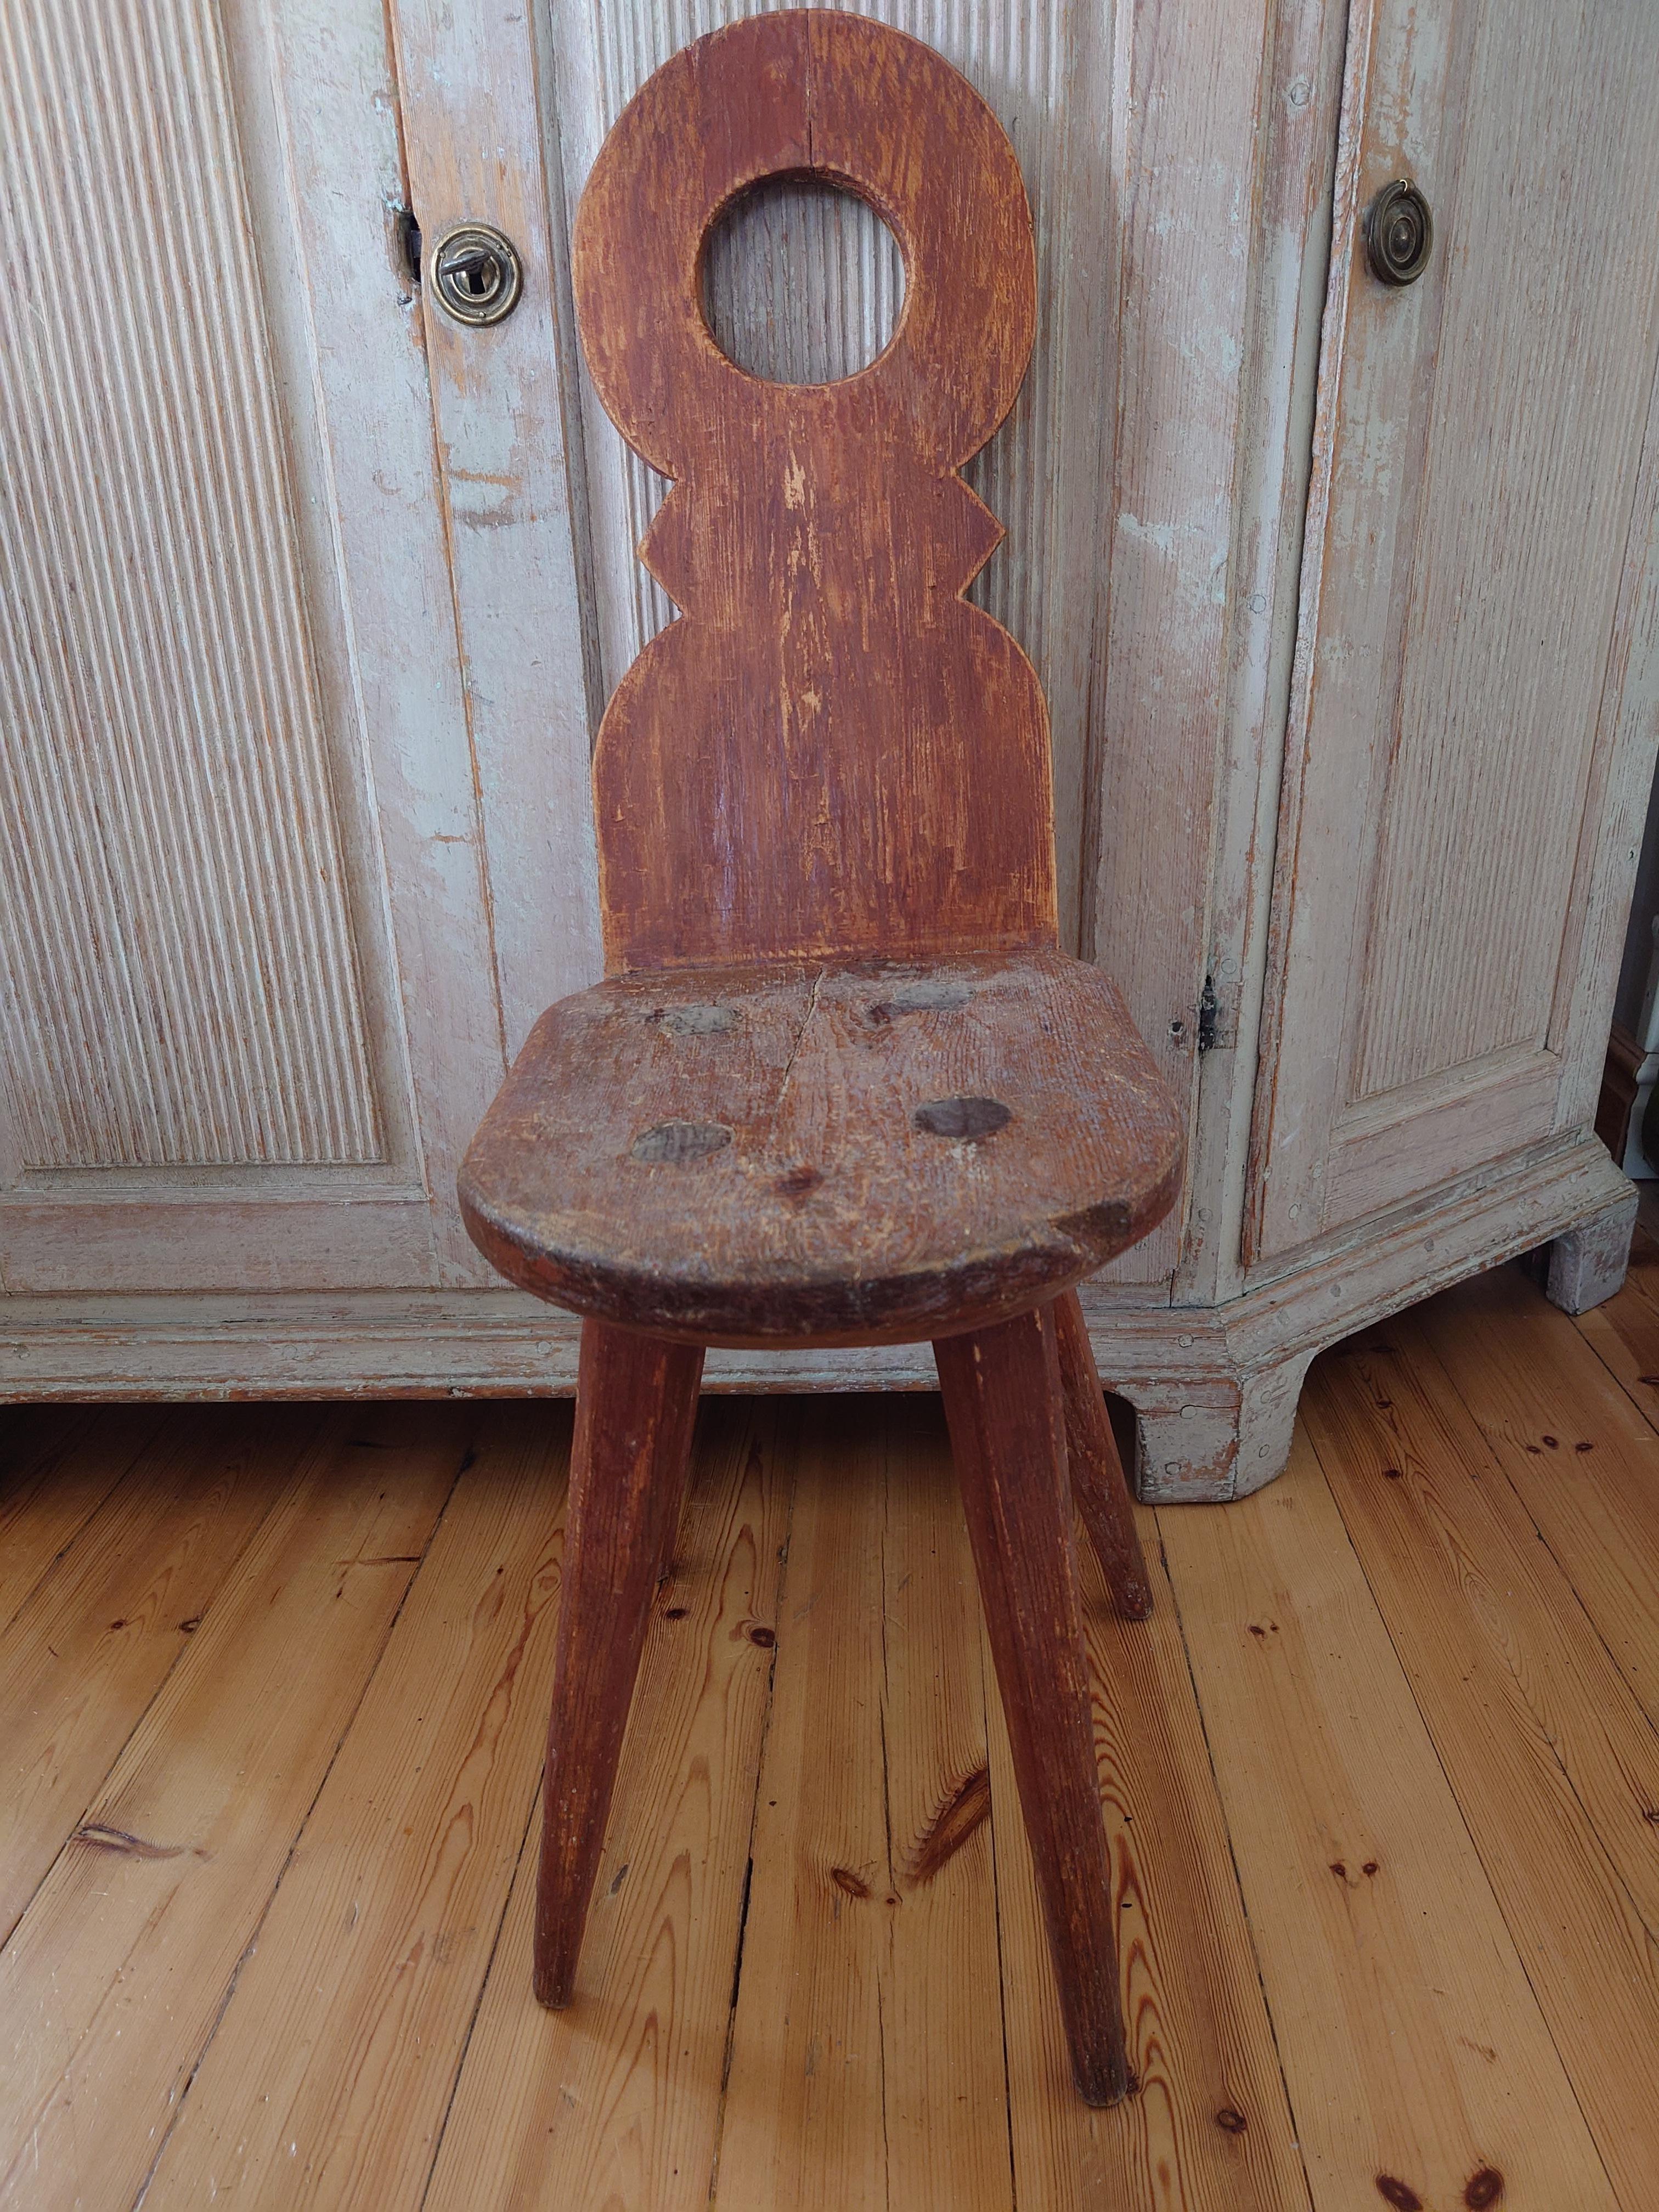 Late 18th Century Swedish Country Folk Art Chair from Northern Sweden.

This charming chair is a true piece of history. It was made by hand in Northern Sweden around 1850
The chair is charming primitive model made by hand in painted pine.It is